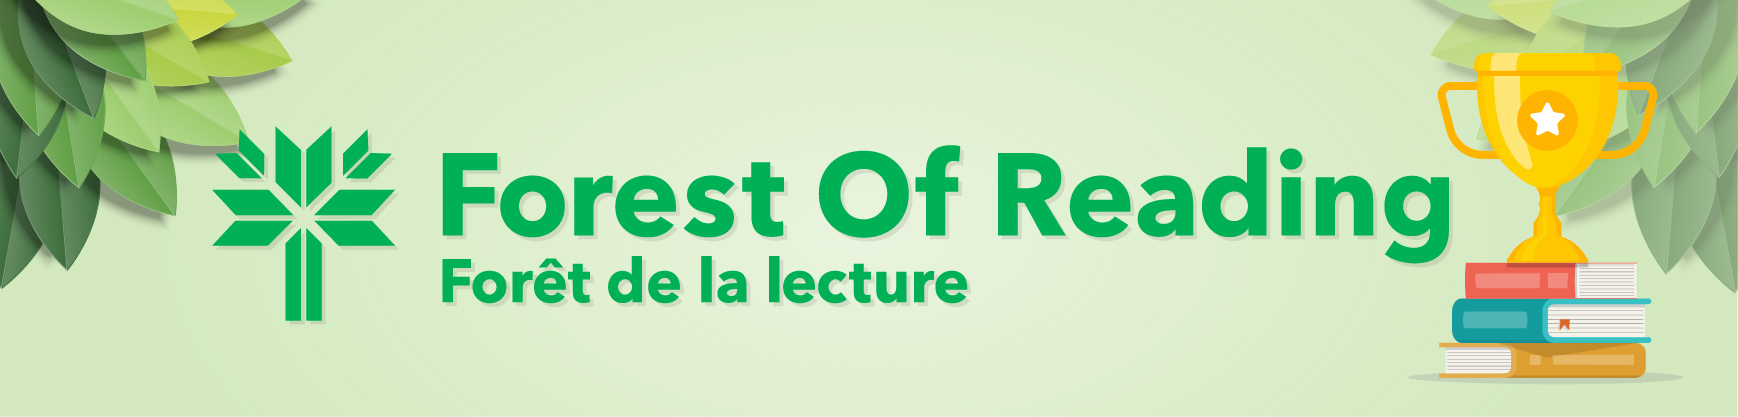 5 Things You Should Know about the Forest of Reading Awards in Canada